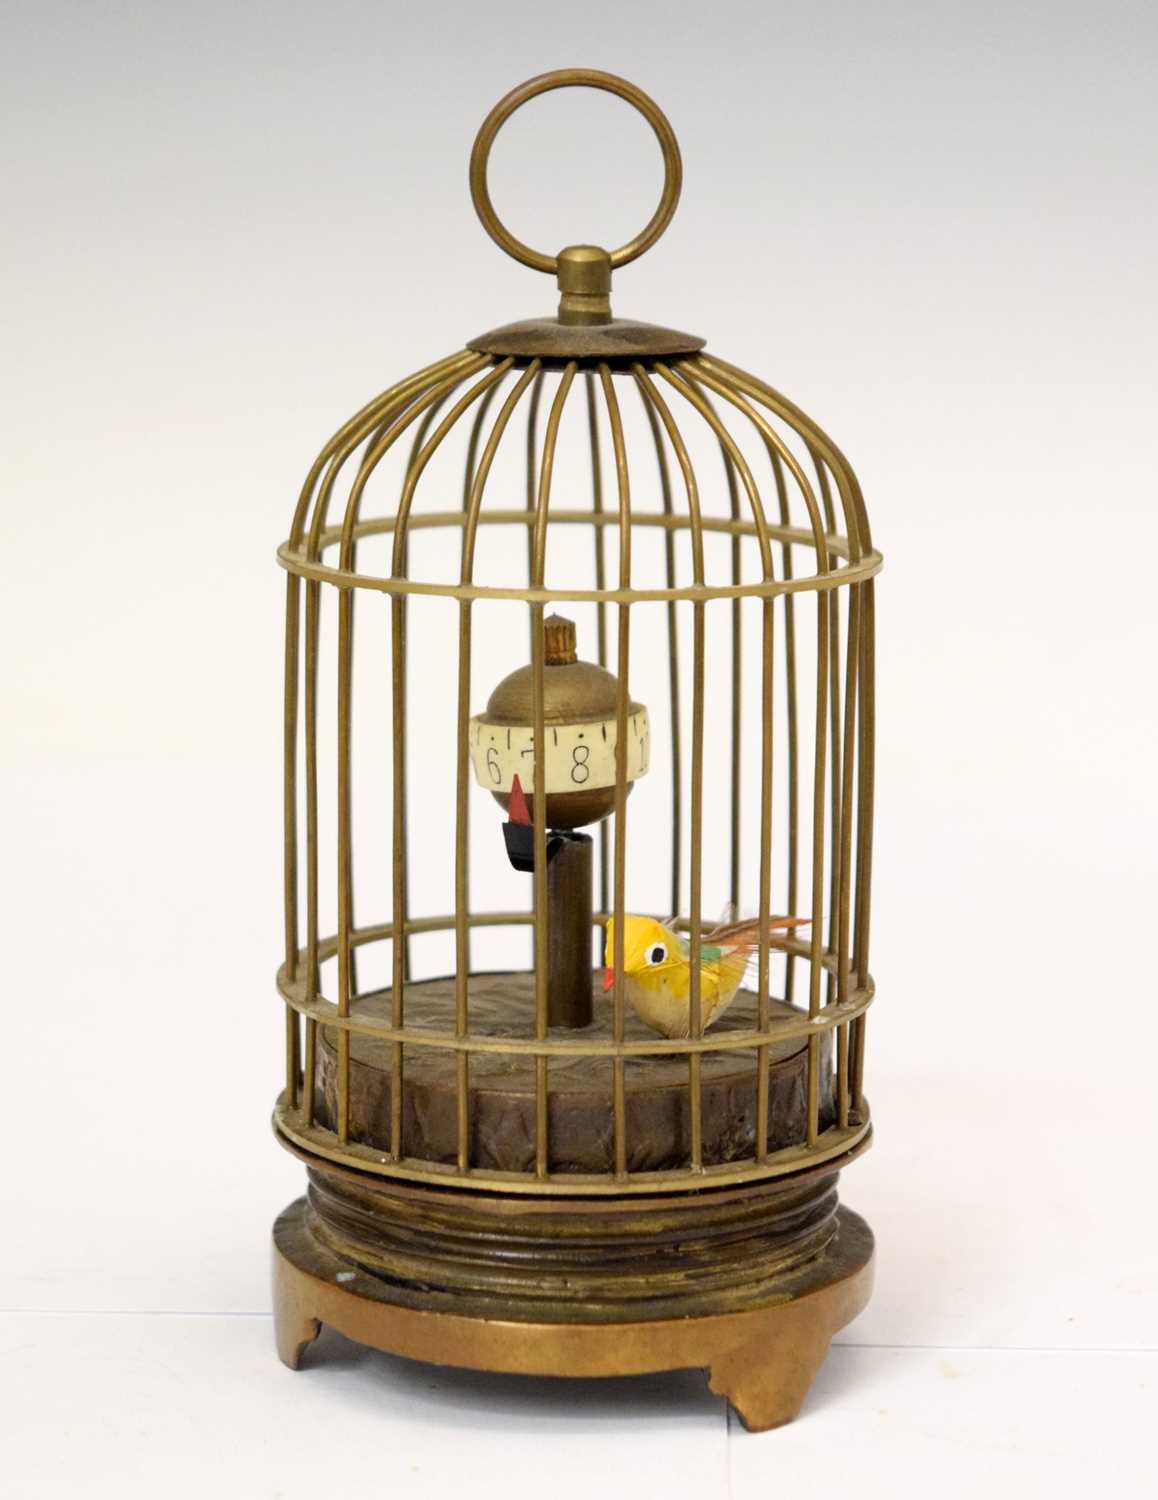 ANTIQUE BRASS BIRD CAGE - Able Auctions